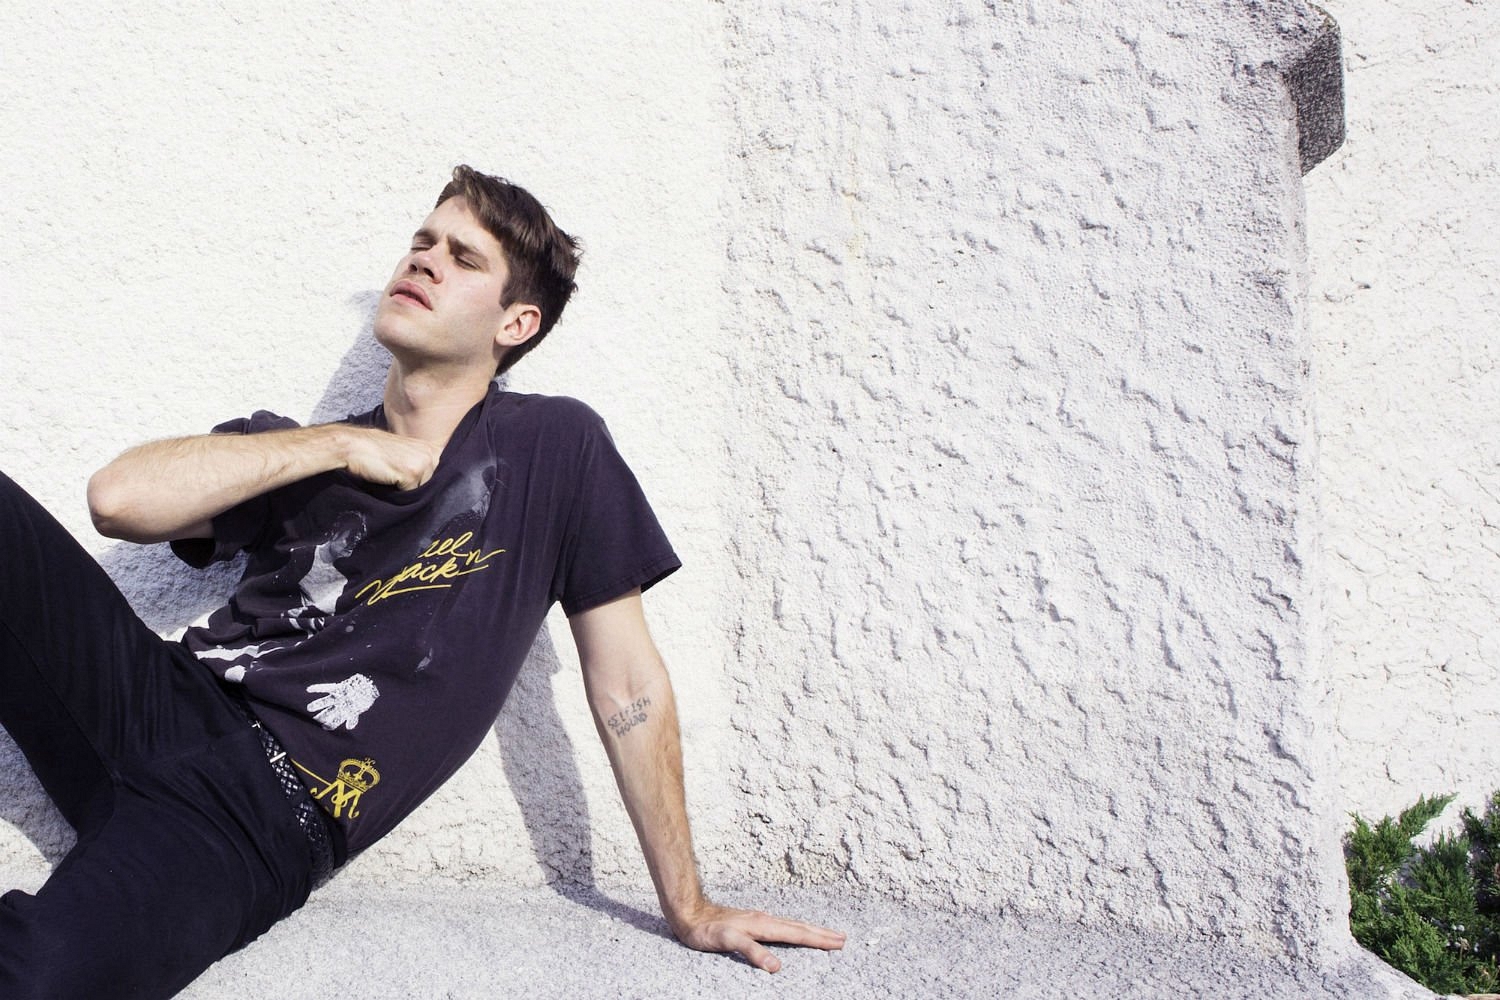 Porches releases surprise new EP ‘Water’ - watch the video for ‘Black Dress’